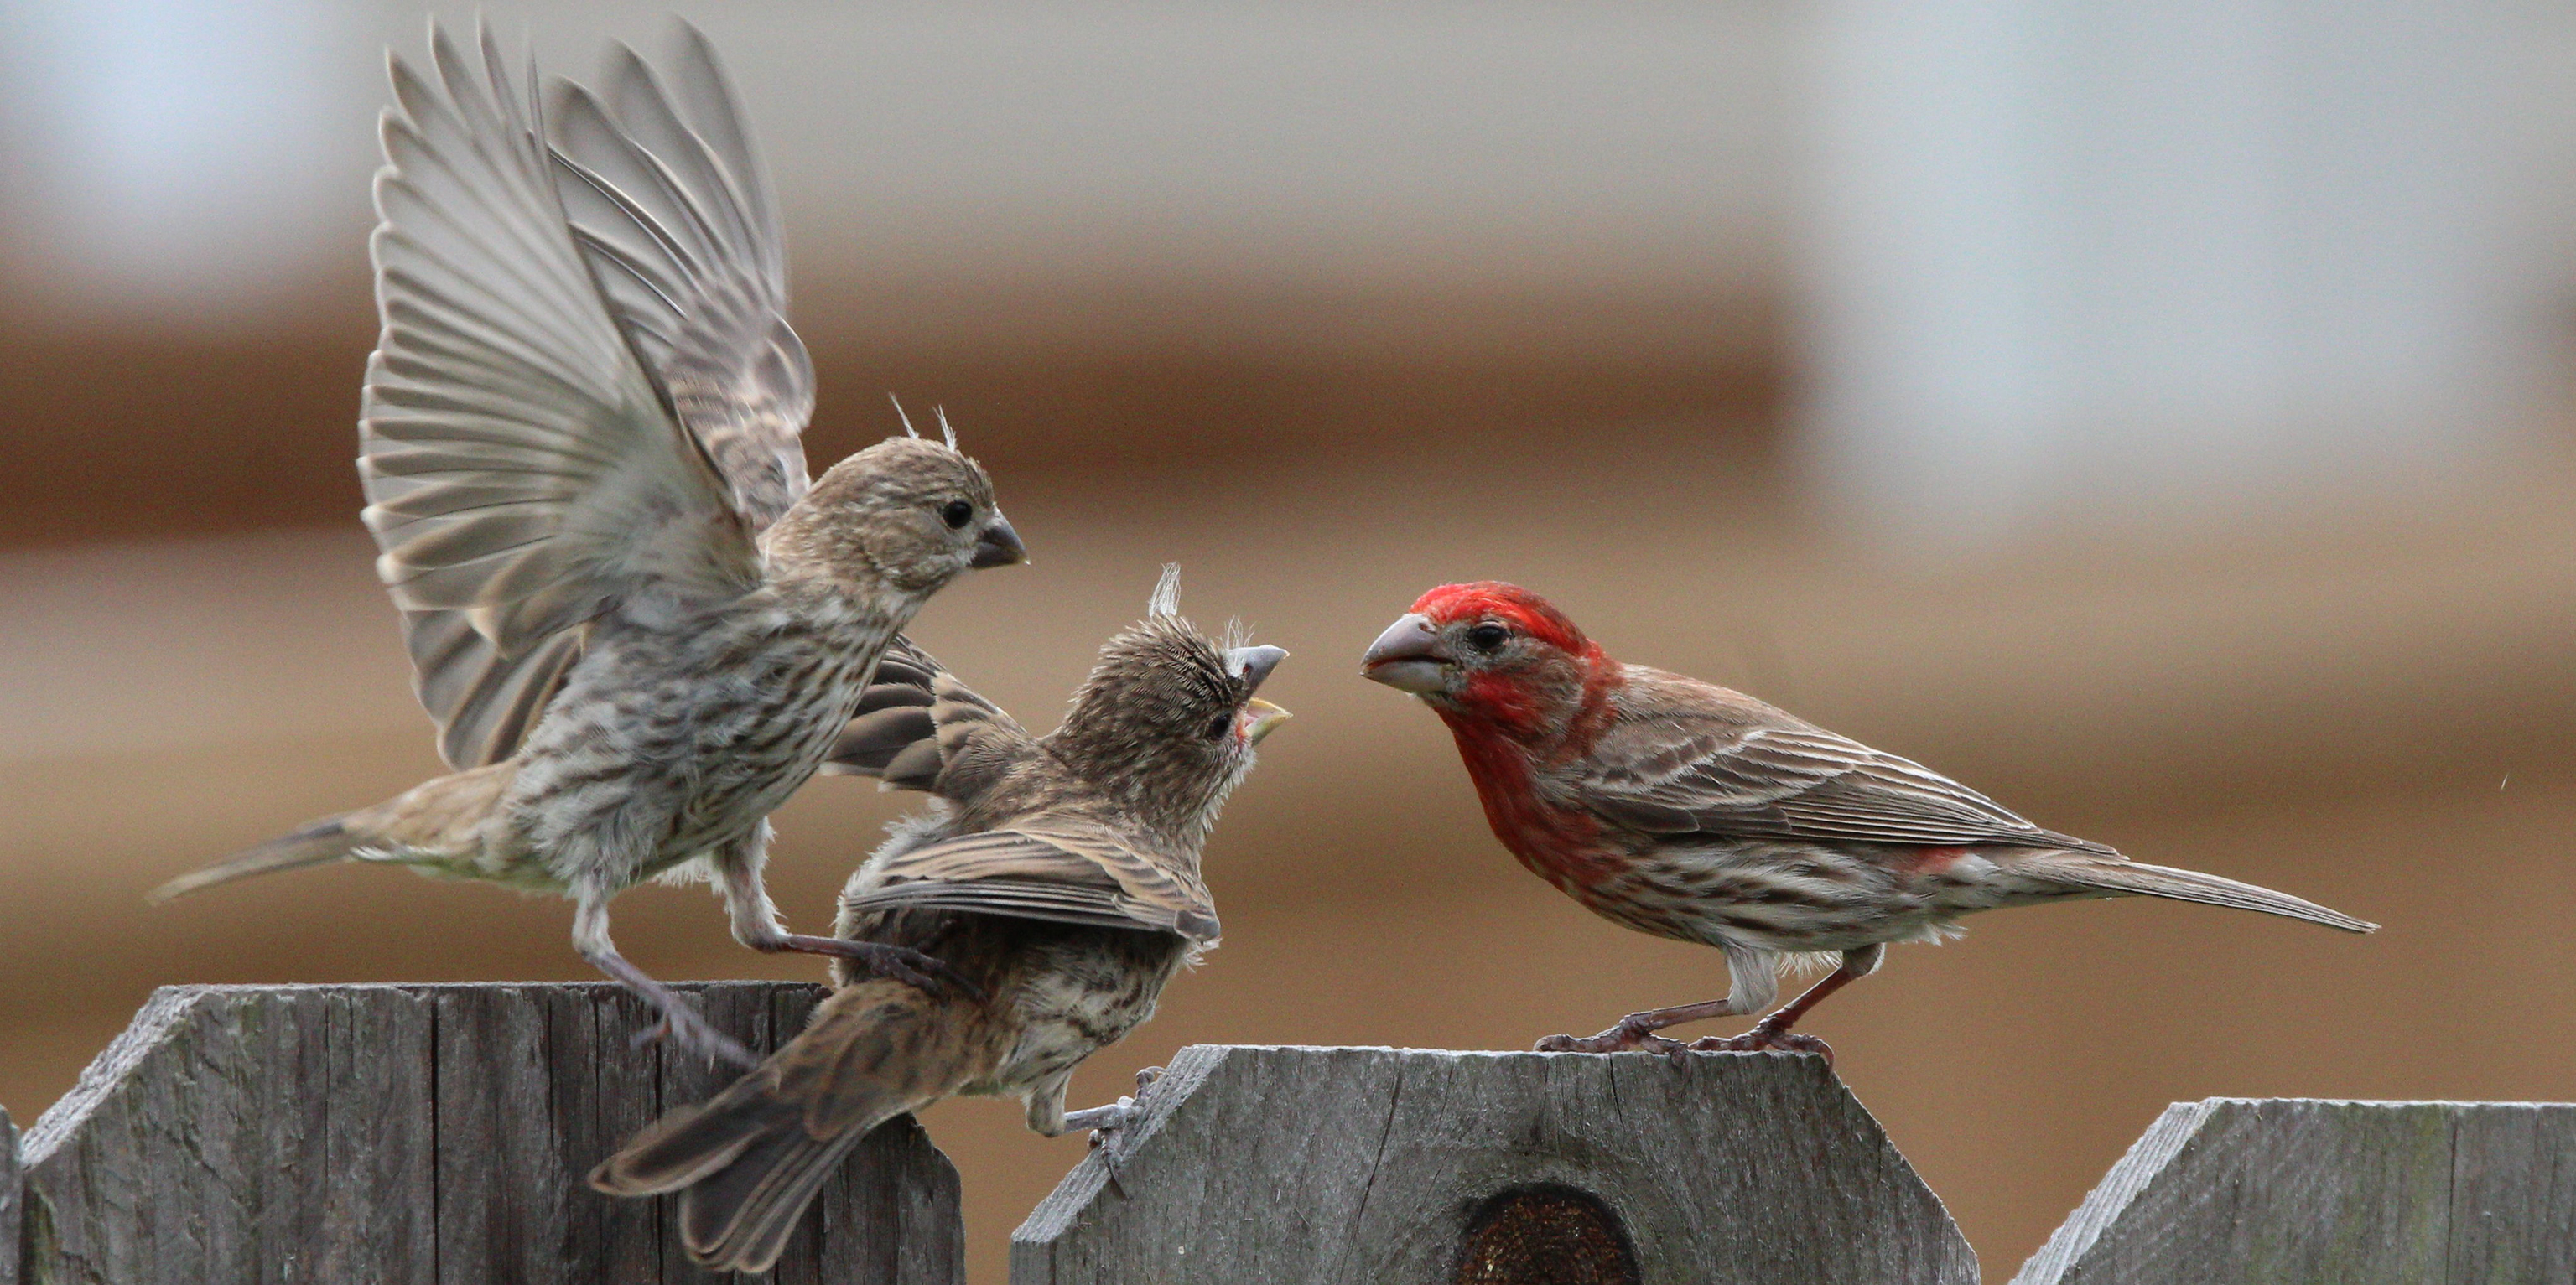 two fledgling House Finches perched on a fence begging for food from an adult male.